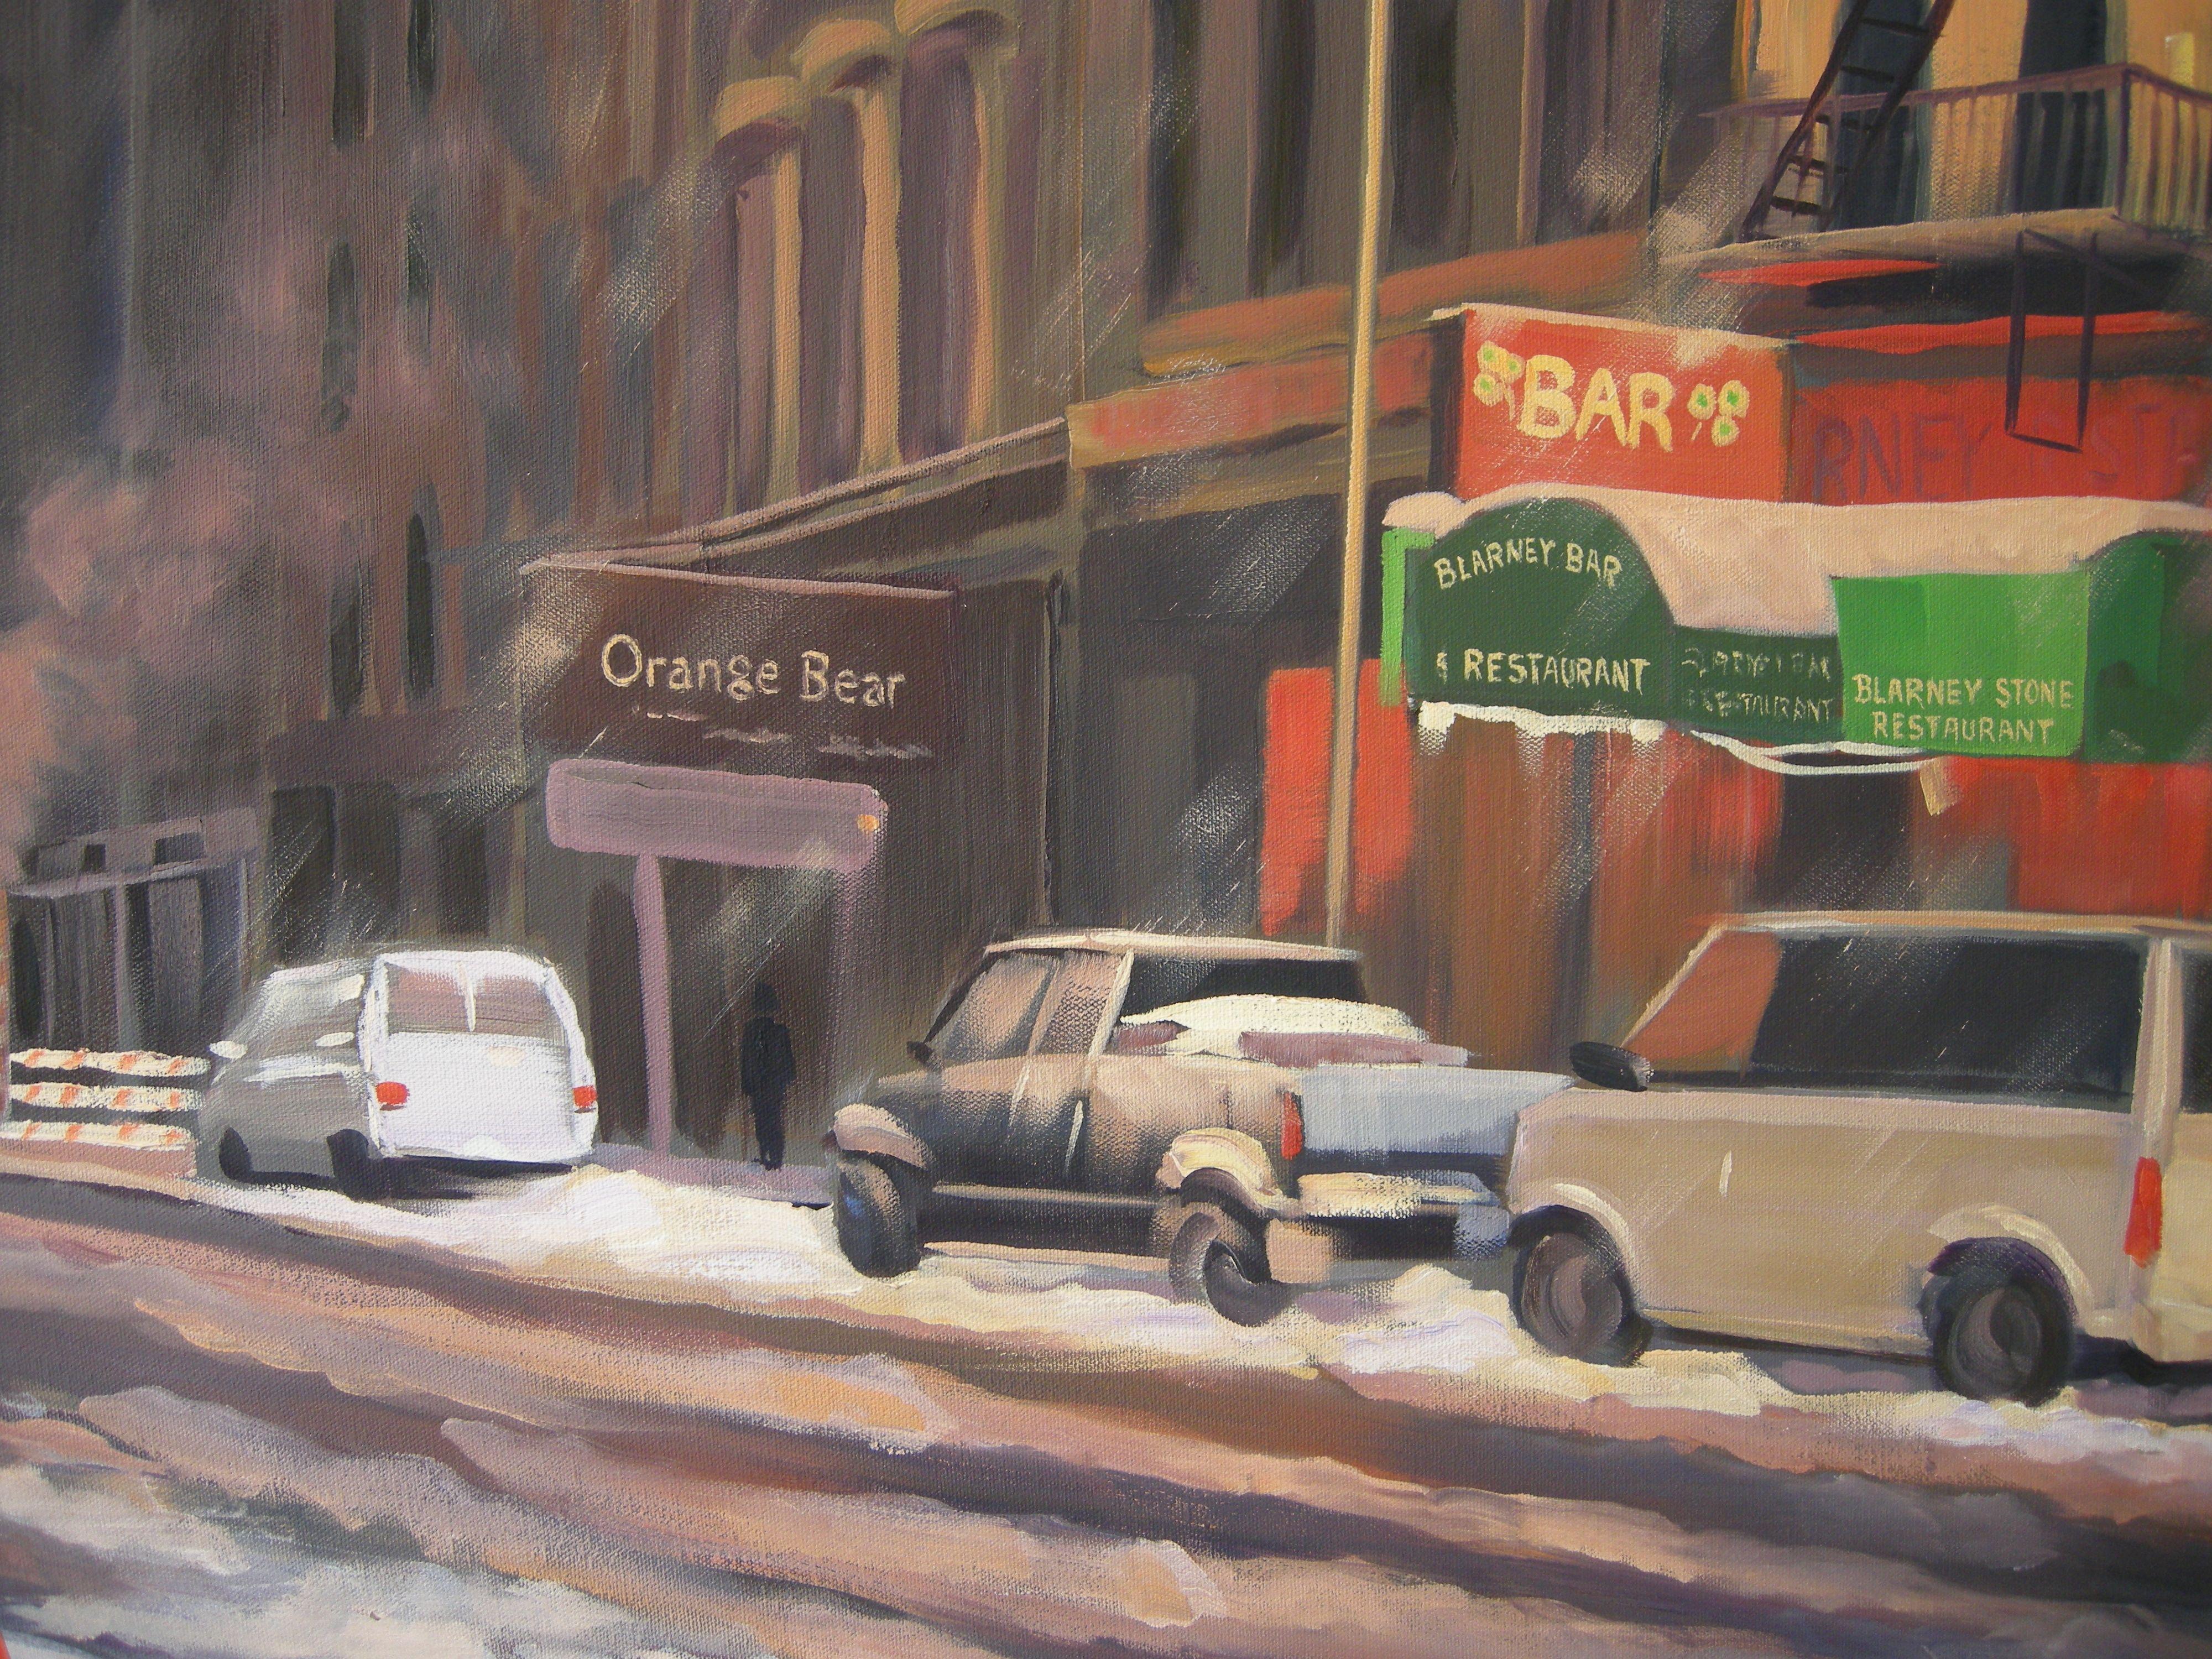 A moody winter's night on Murray St in lower Manhattan in Tribeca. The night sky, snow showers, colorful bar signs, window lights and street lights all combine to create a cold slushy chilly scene, offset by the promise of warmth within! Although